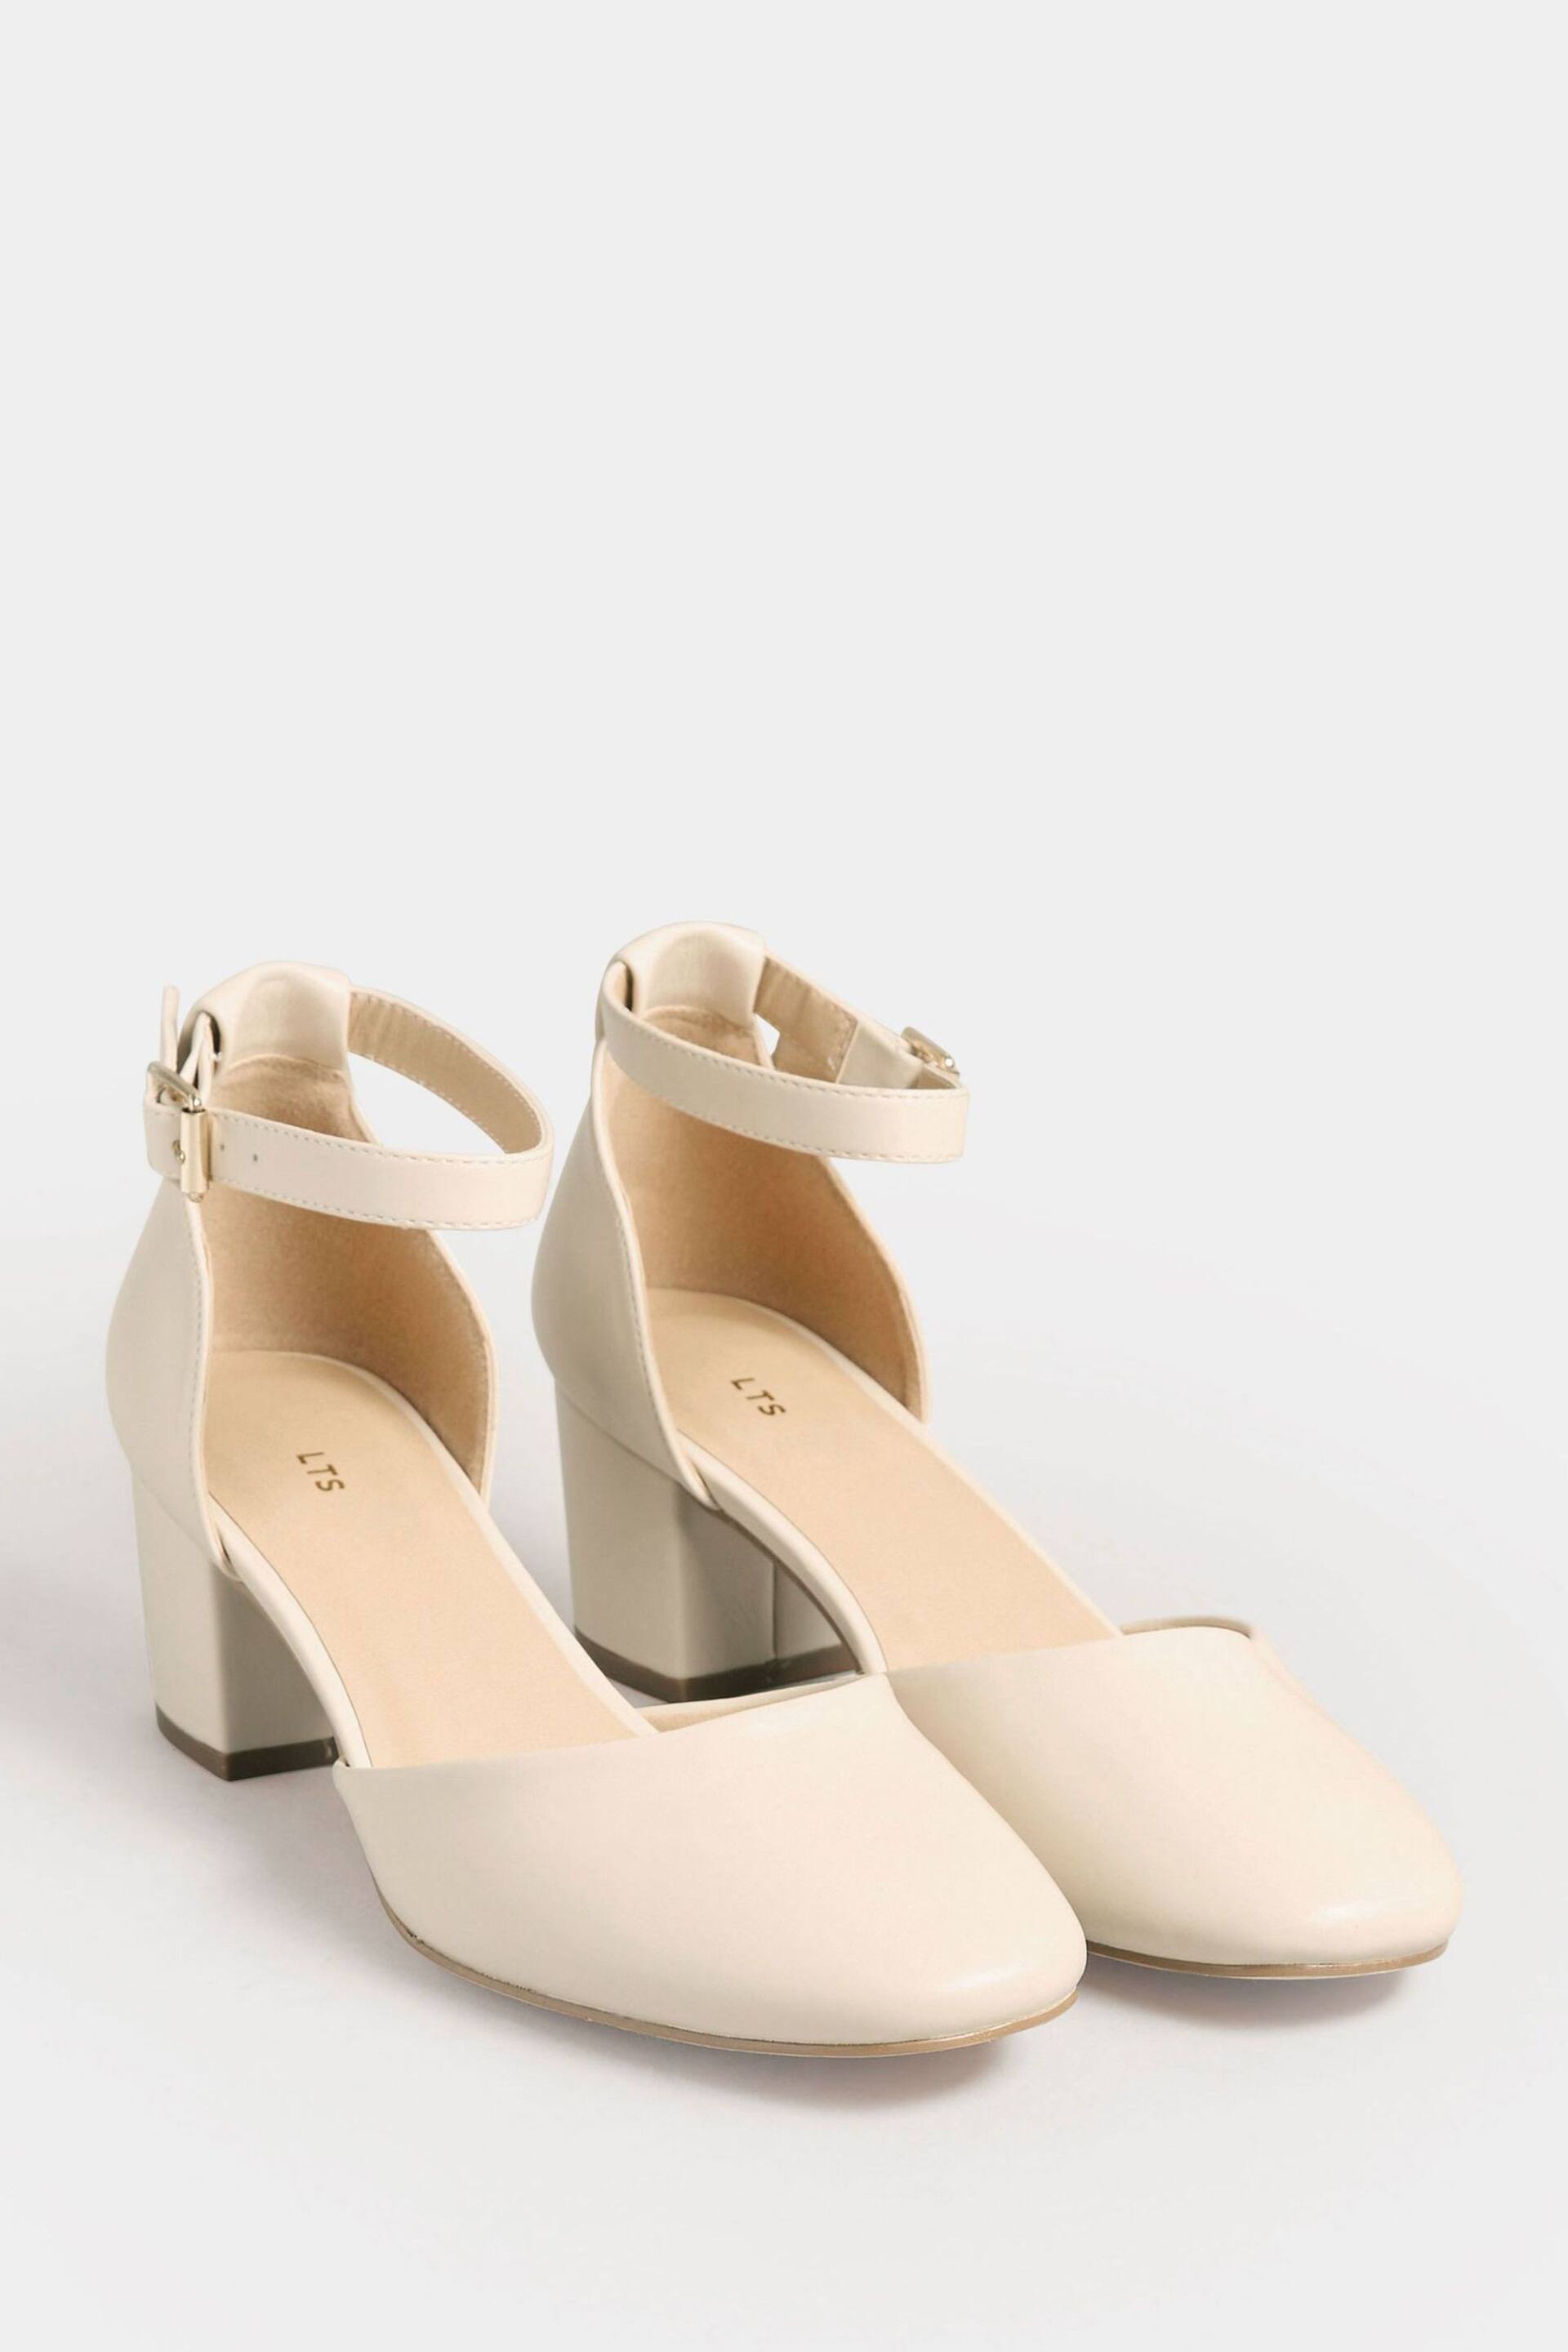 Long Tall Sally Nude Two Part Block Heel Court Shoes - Image 3 of 5